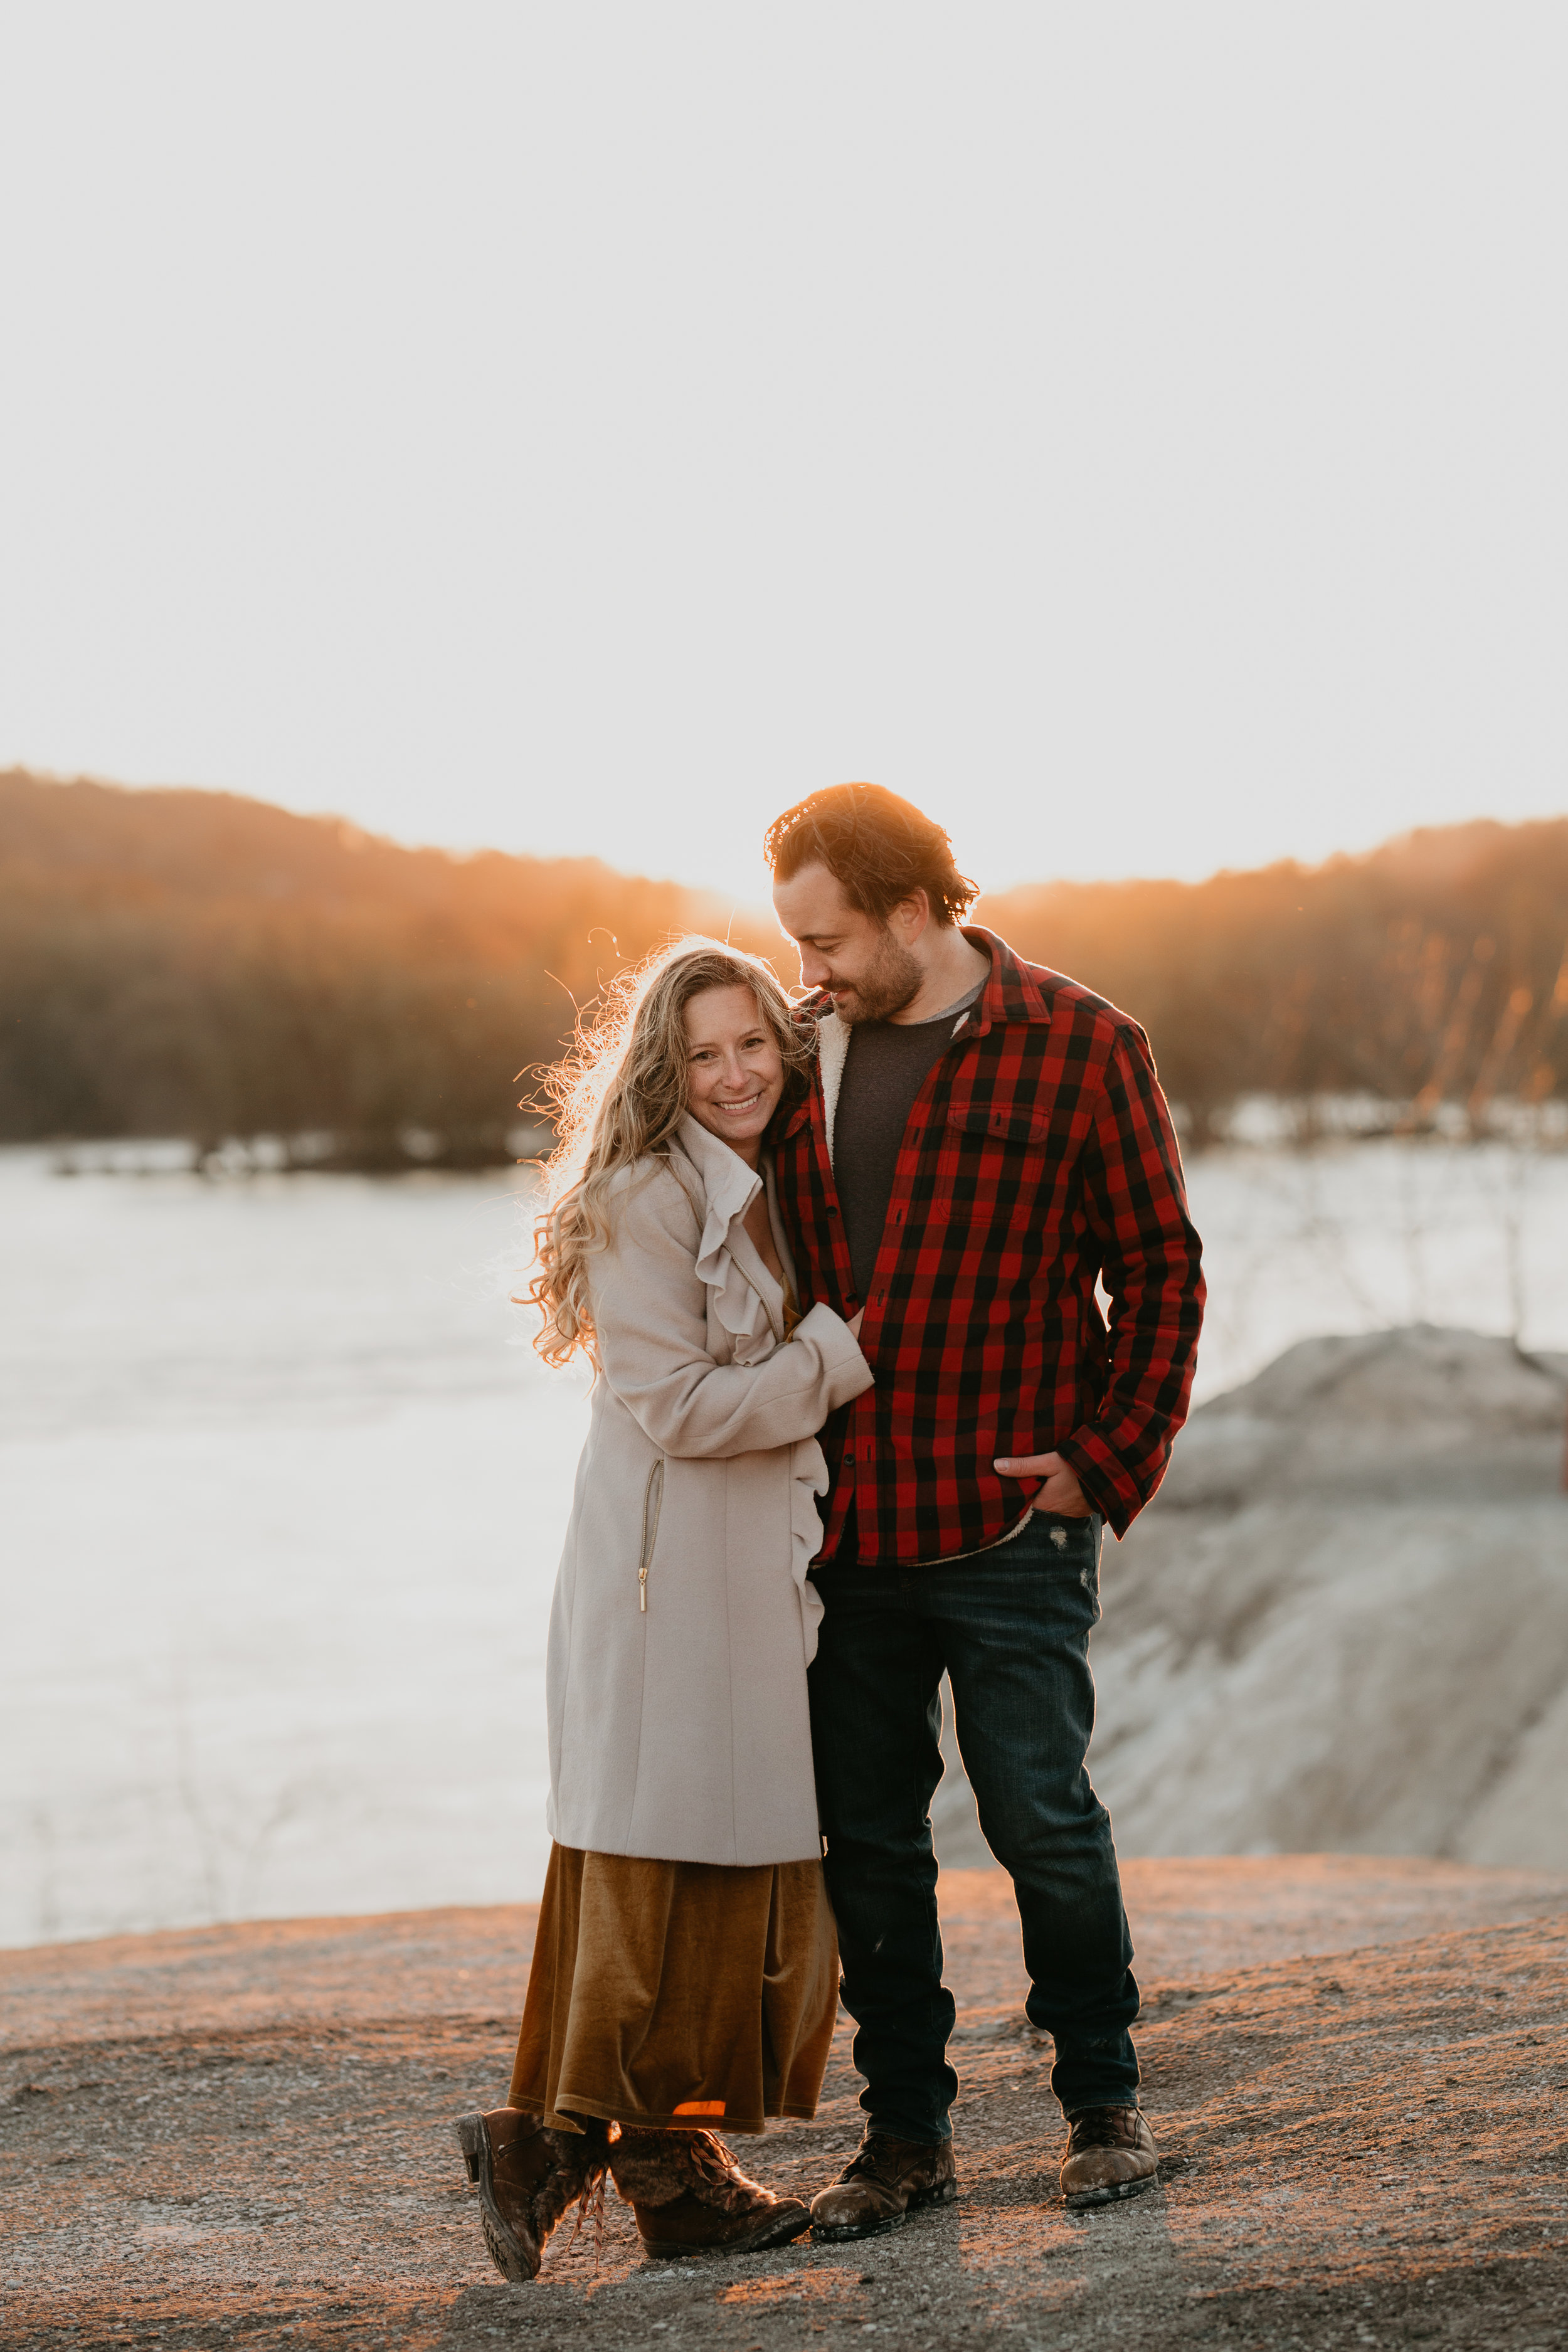 nicole-daacke-photography-white-cliffs-of-conoy-in-lancaster-pa-pennsylvania-adventure-session-adventure-elopement-photographer-engagement session-in-lancaster-pa-photographer-golden-sunset-winter-solstice-wedding-riverside-elopement-5327.jpg